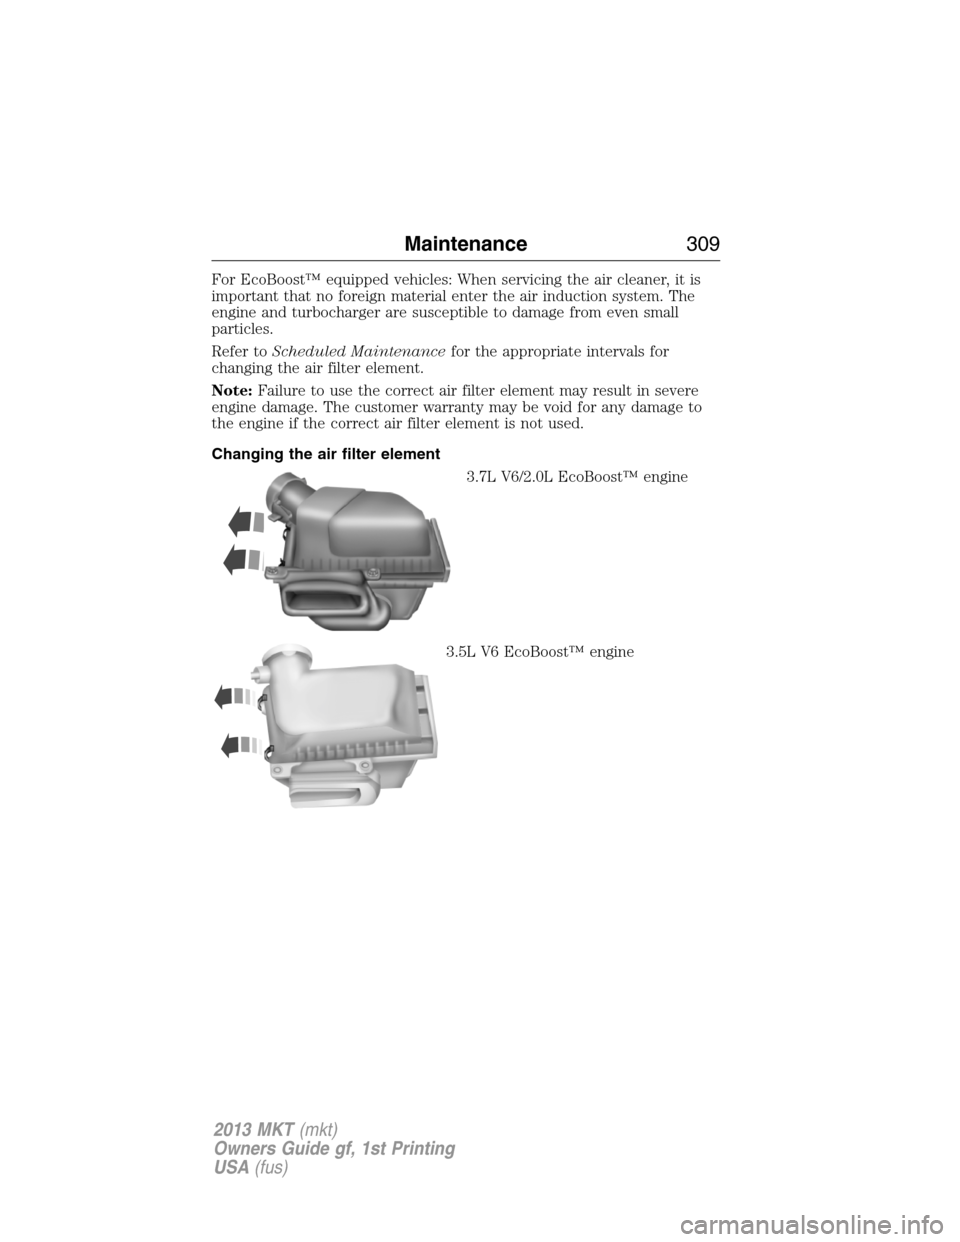 LINCOLN MKT 2013 Service Manual For EcoBoost™ equipped vehicles: When servicing the air cleaner, it is
important that no foreign material enter the air induction system. The
engine and turbocharger are susceptible to damage from e